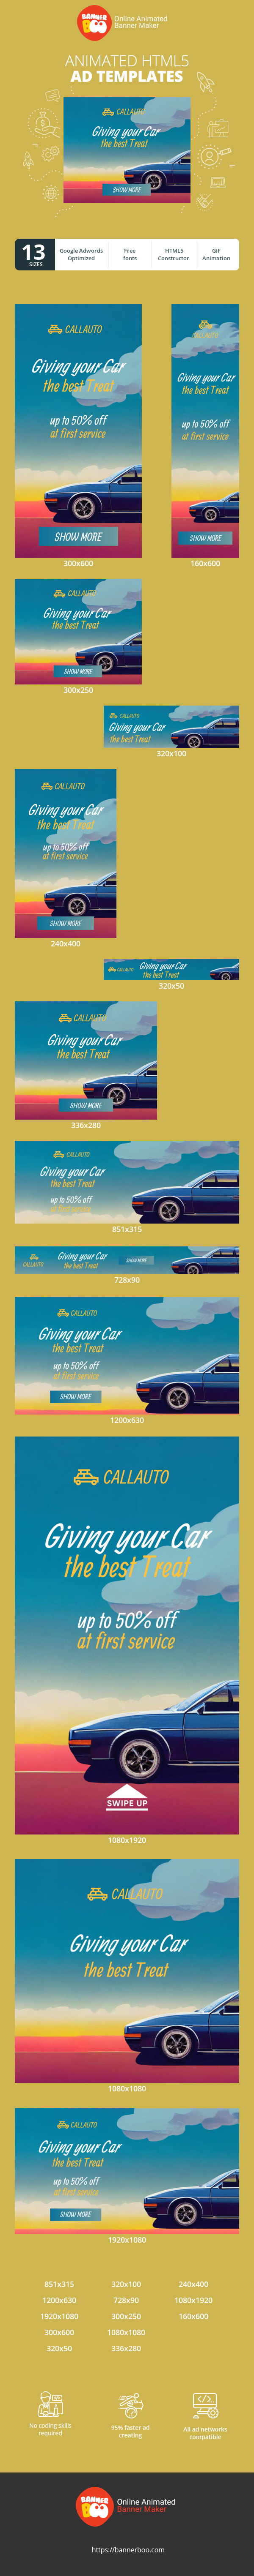 Шаблон рекламного банера — Giving Your Car The Best Treat — Up To 50% Off At First Service